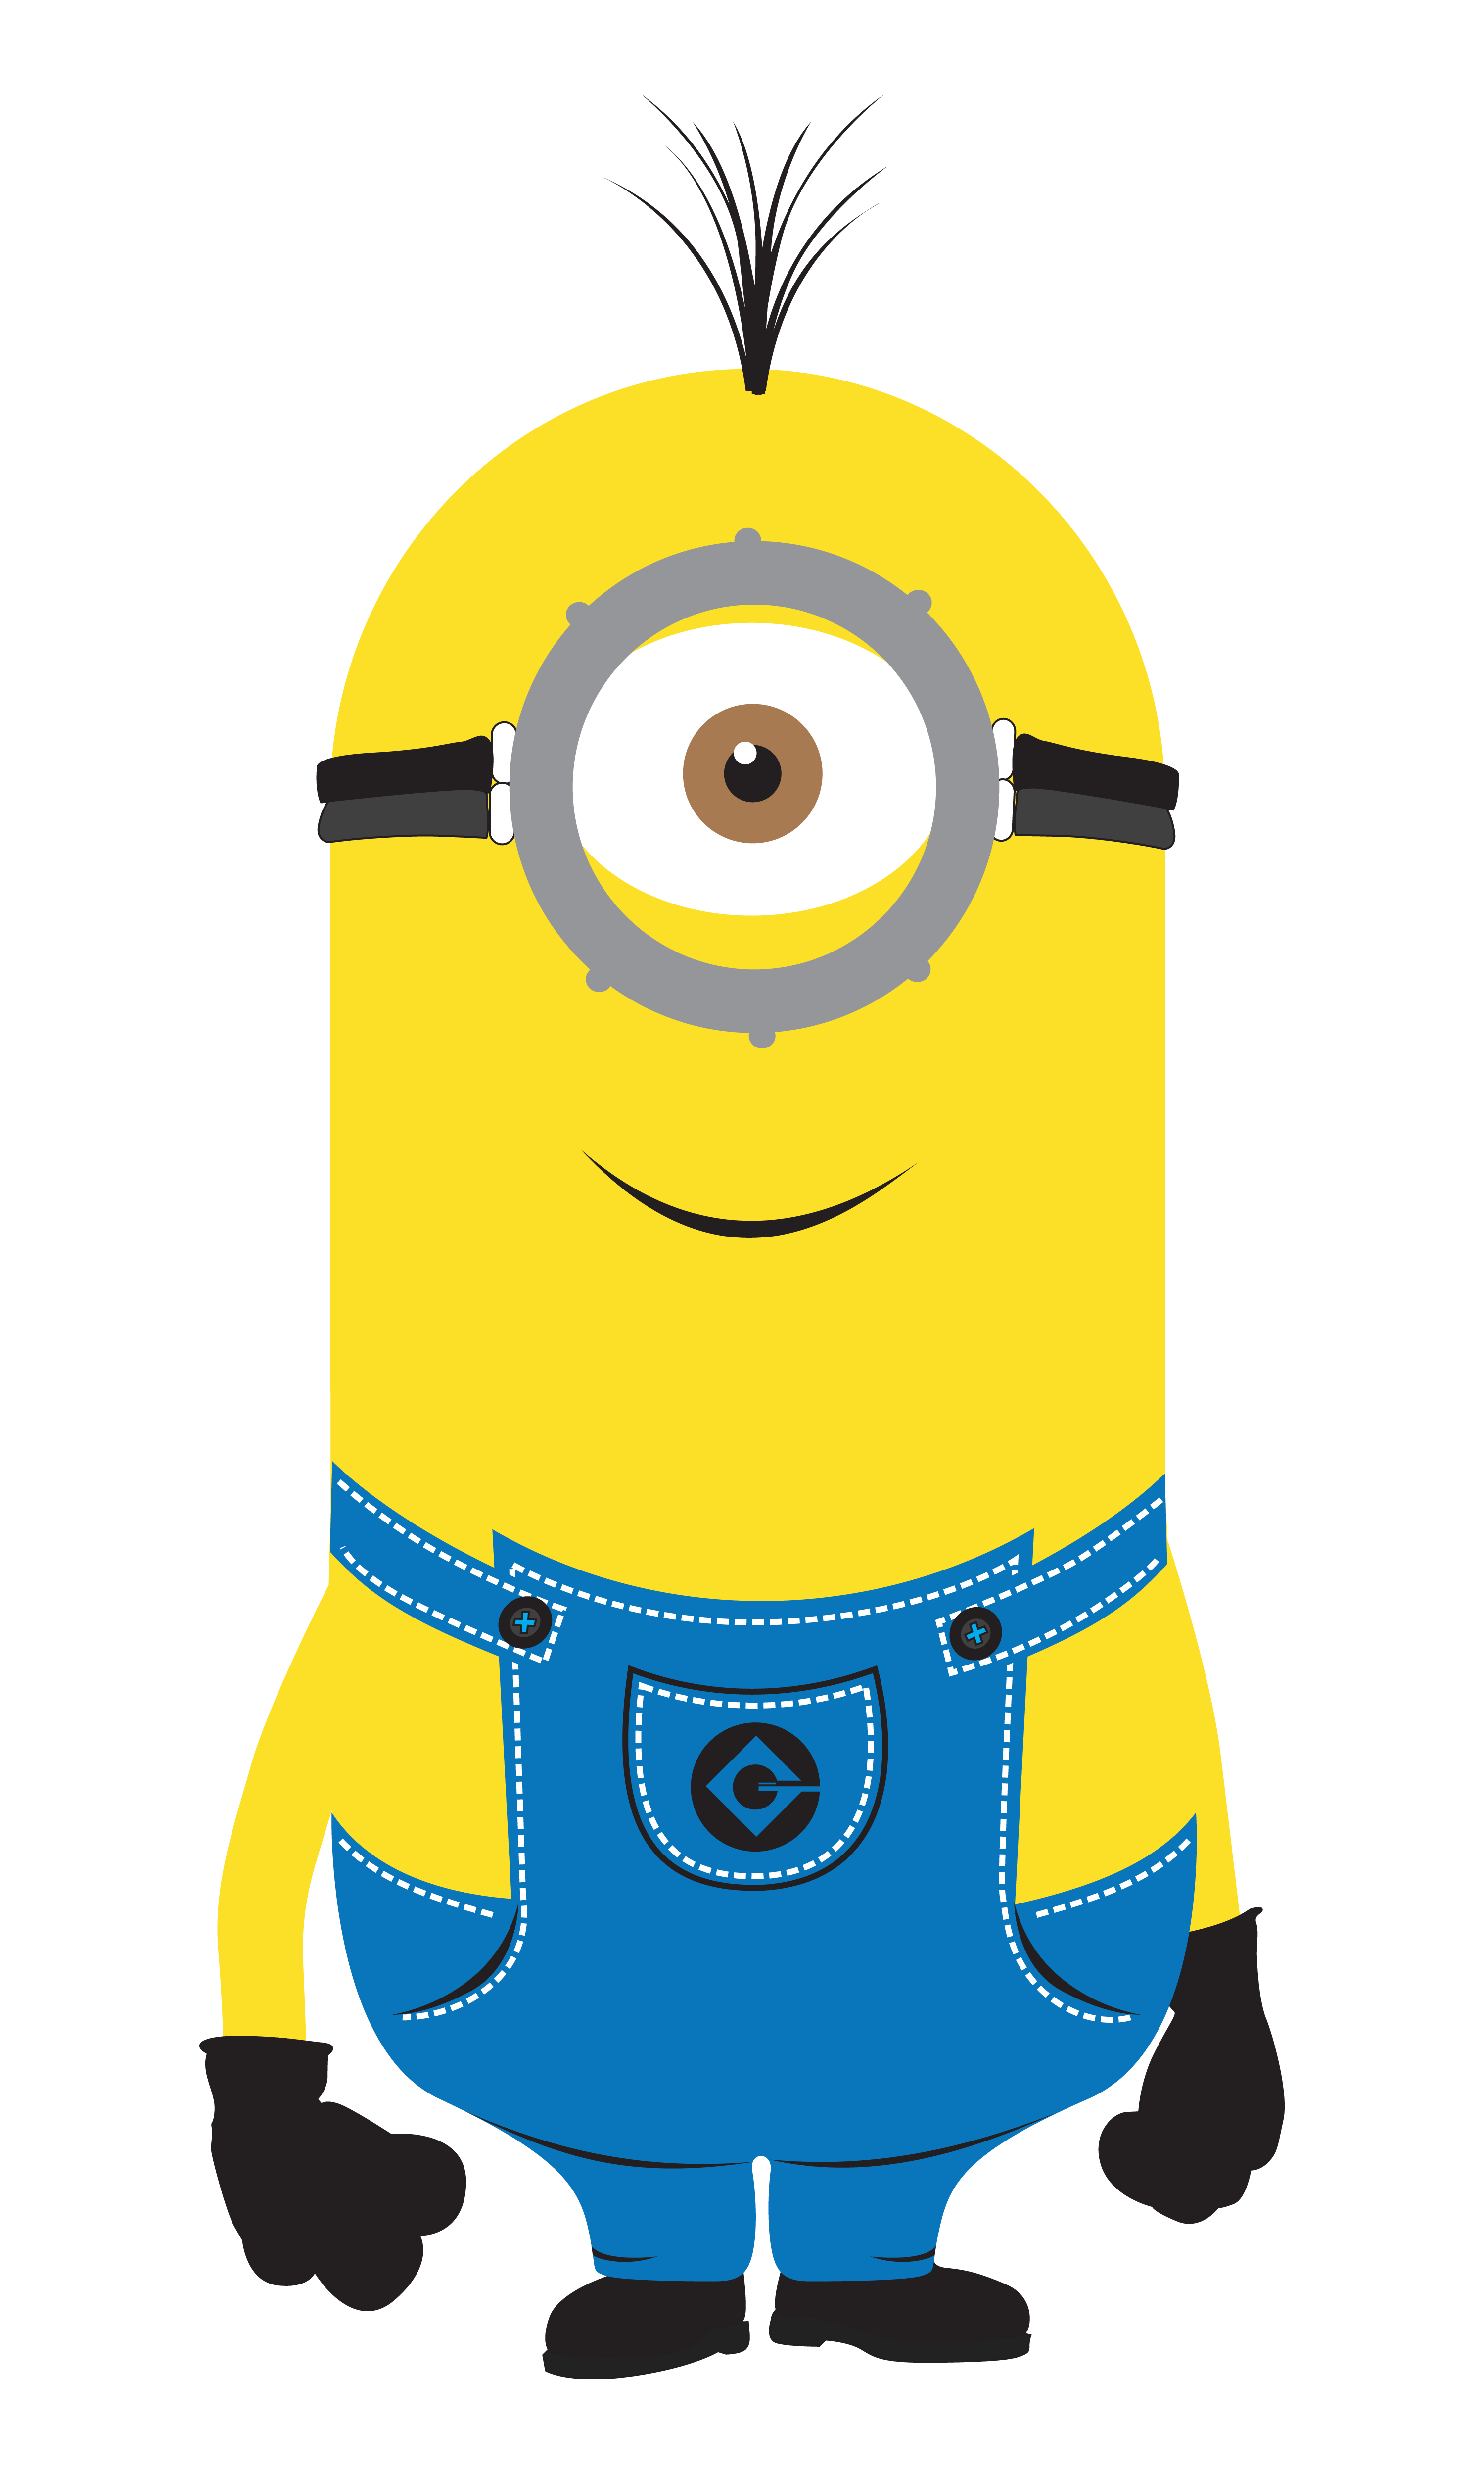 Female, Girl, Minions PNG Transparent Background, Free Download